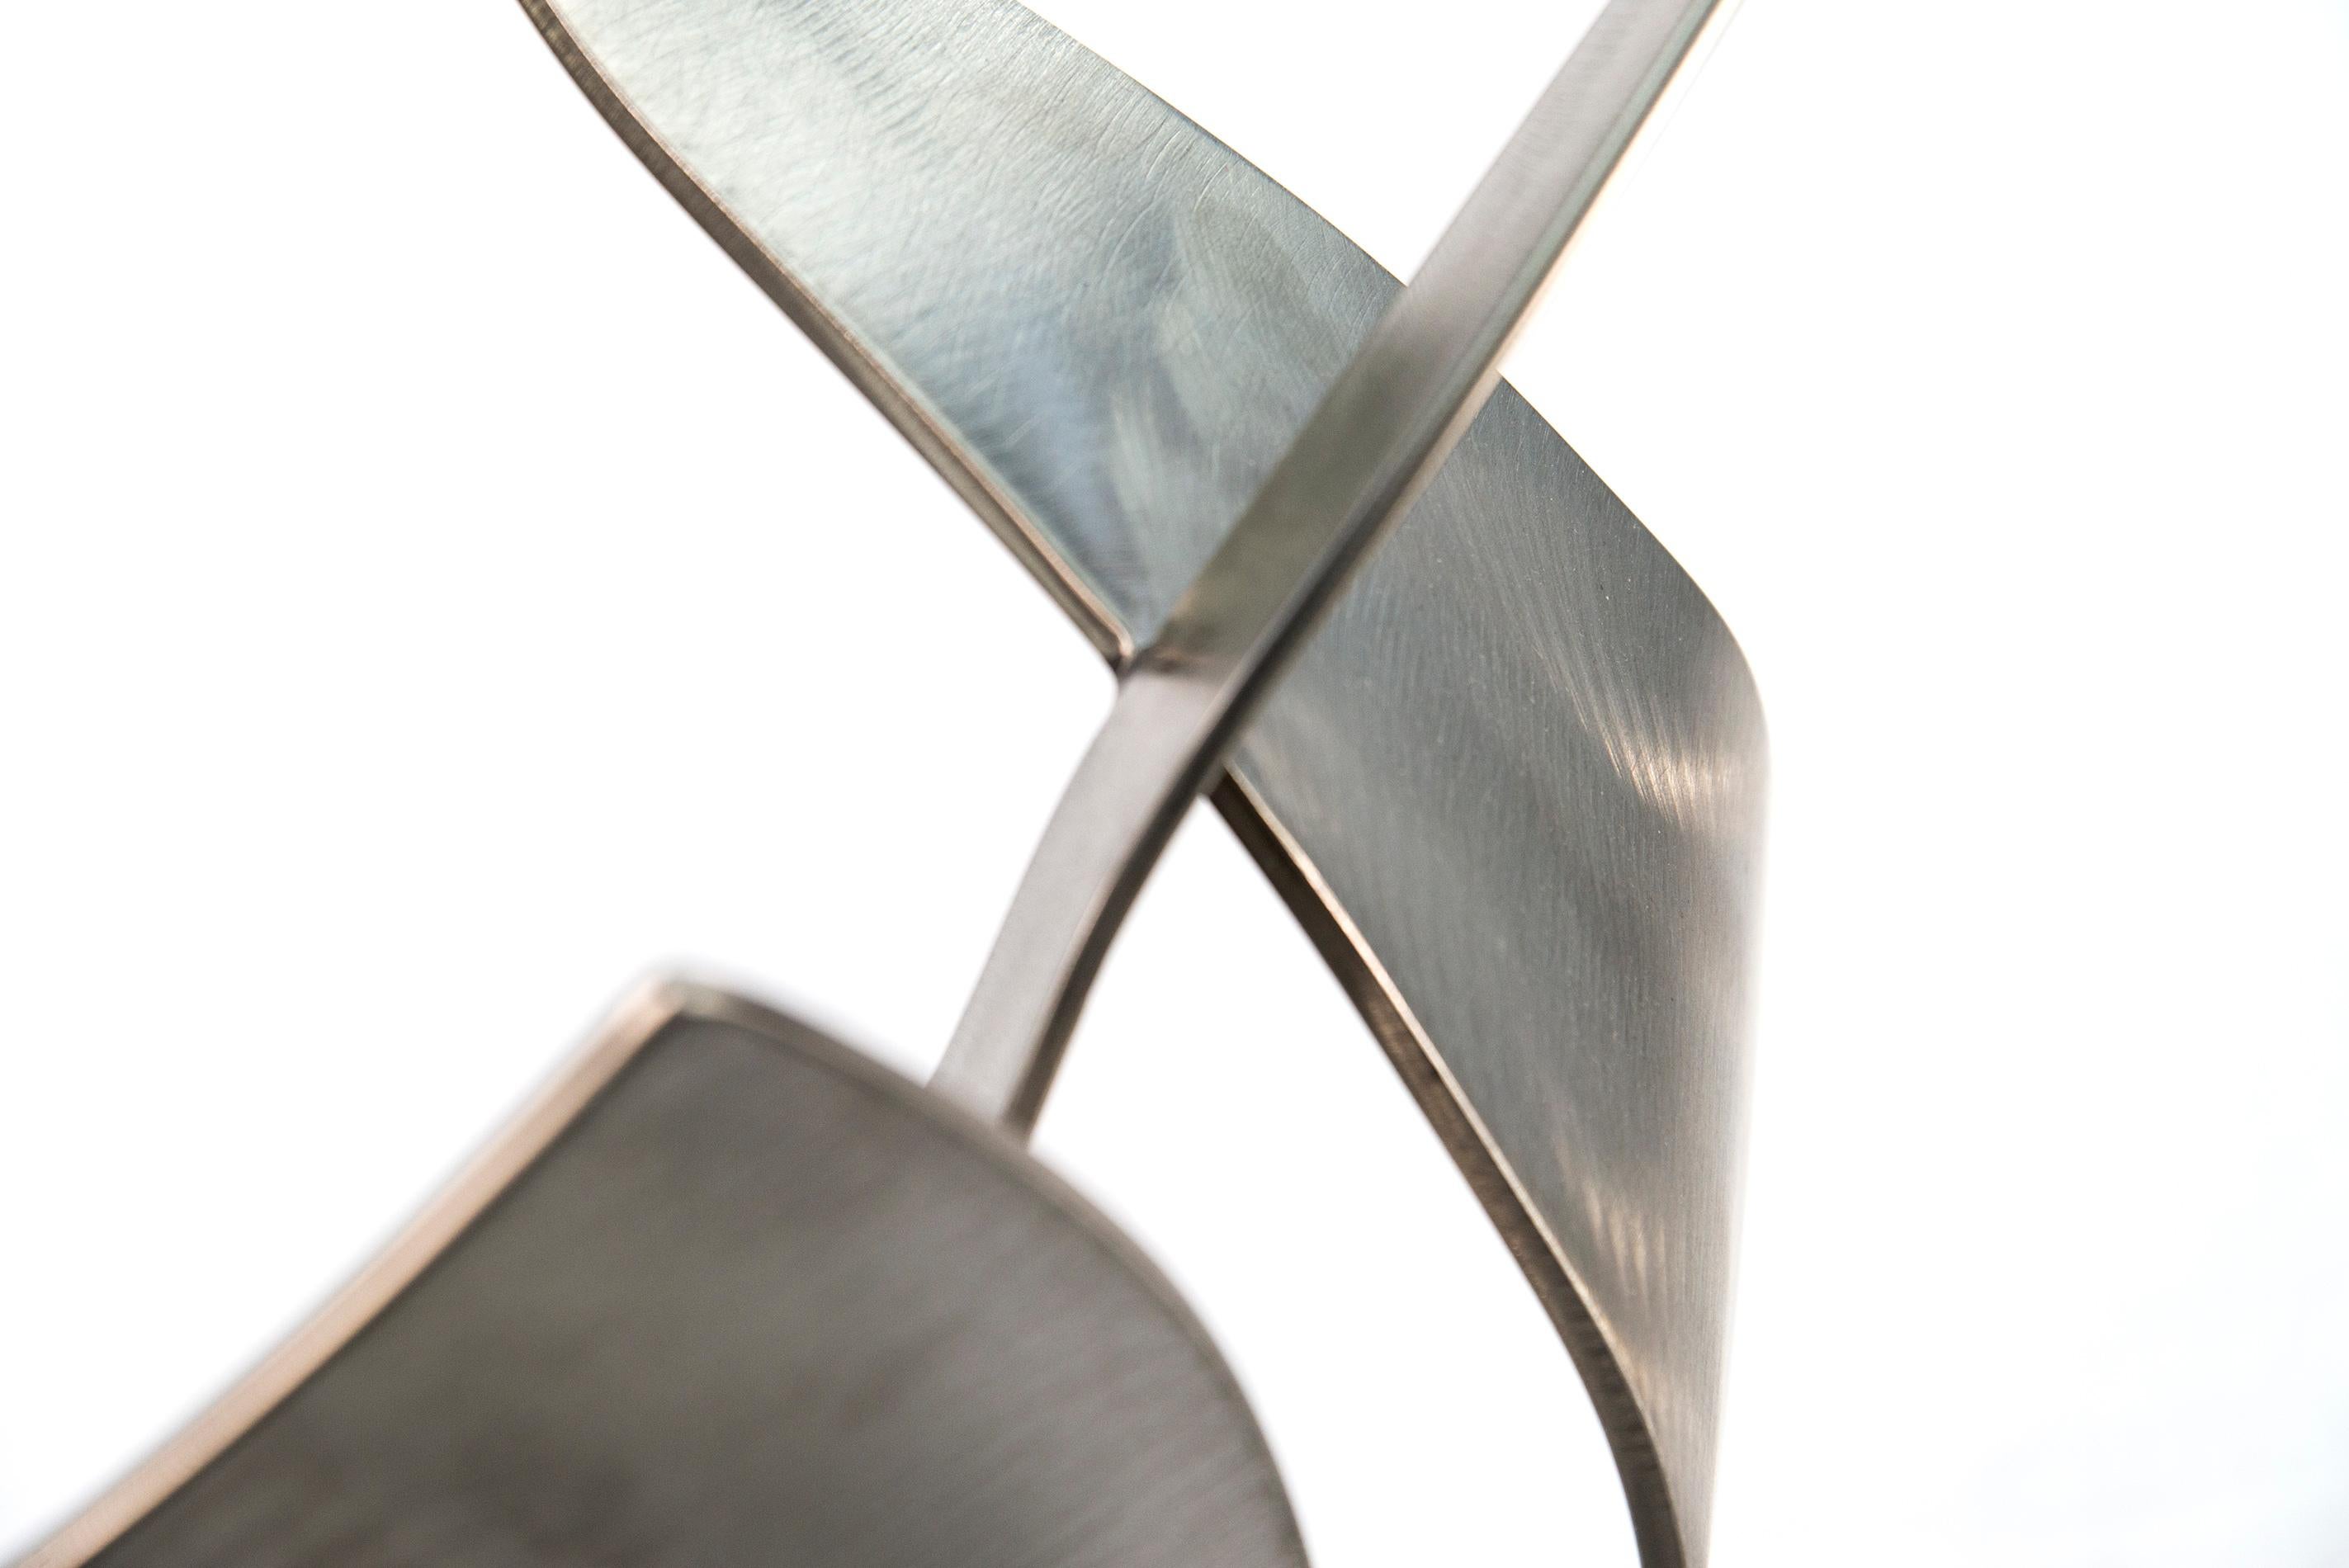 They appear to dance in mid-air. This is Kevin Robb. His graceful, curved abstract sculptures are hand forged from stainless steel. The highly polished surfaces of the three intersecting pieces reflect light and cast shadows. Working as a sculptor